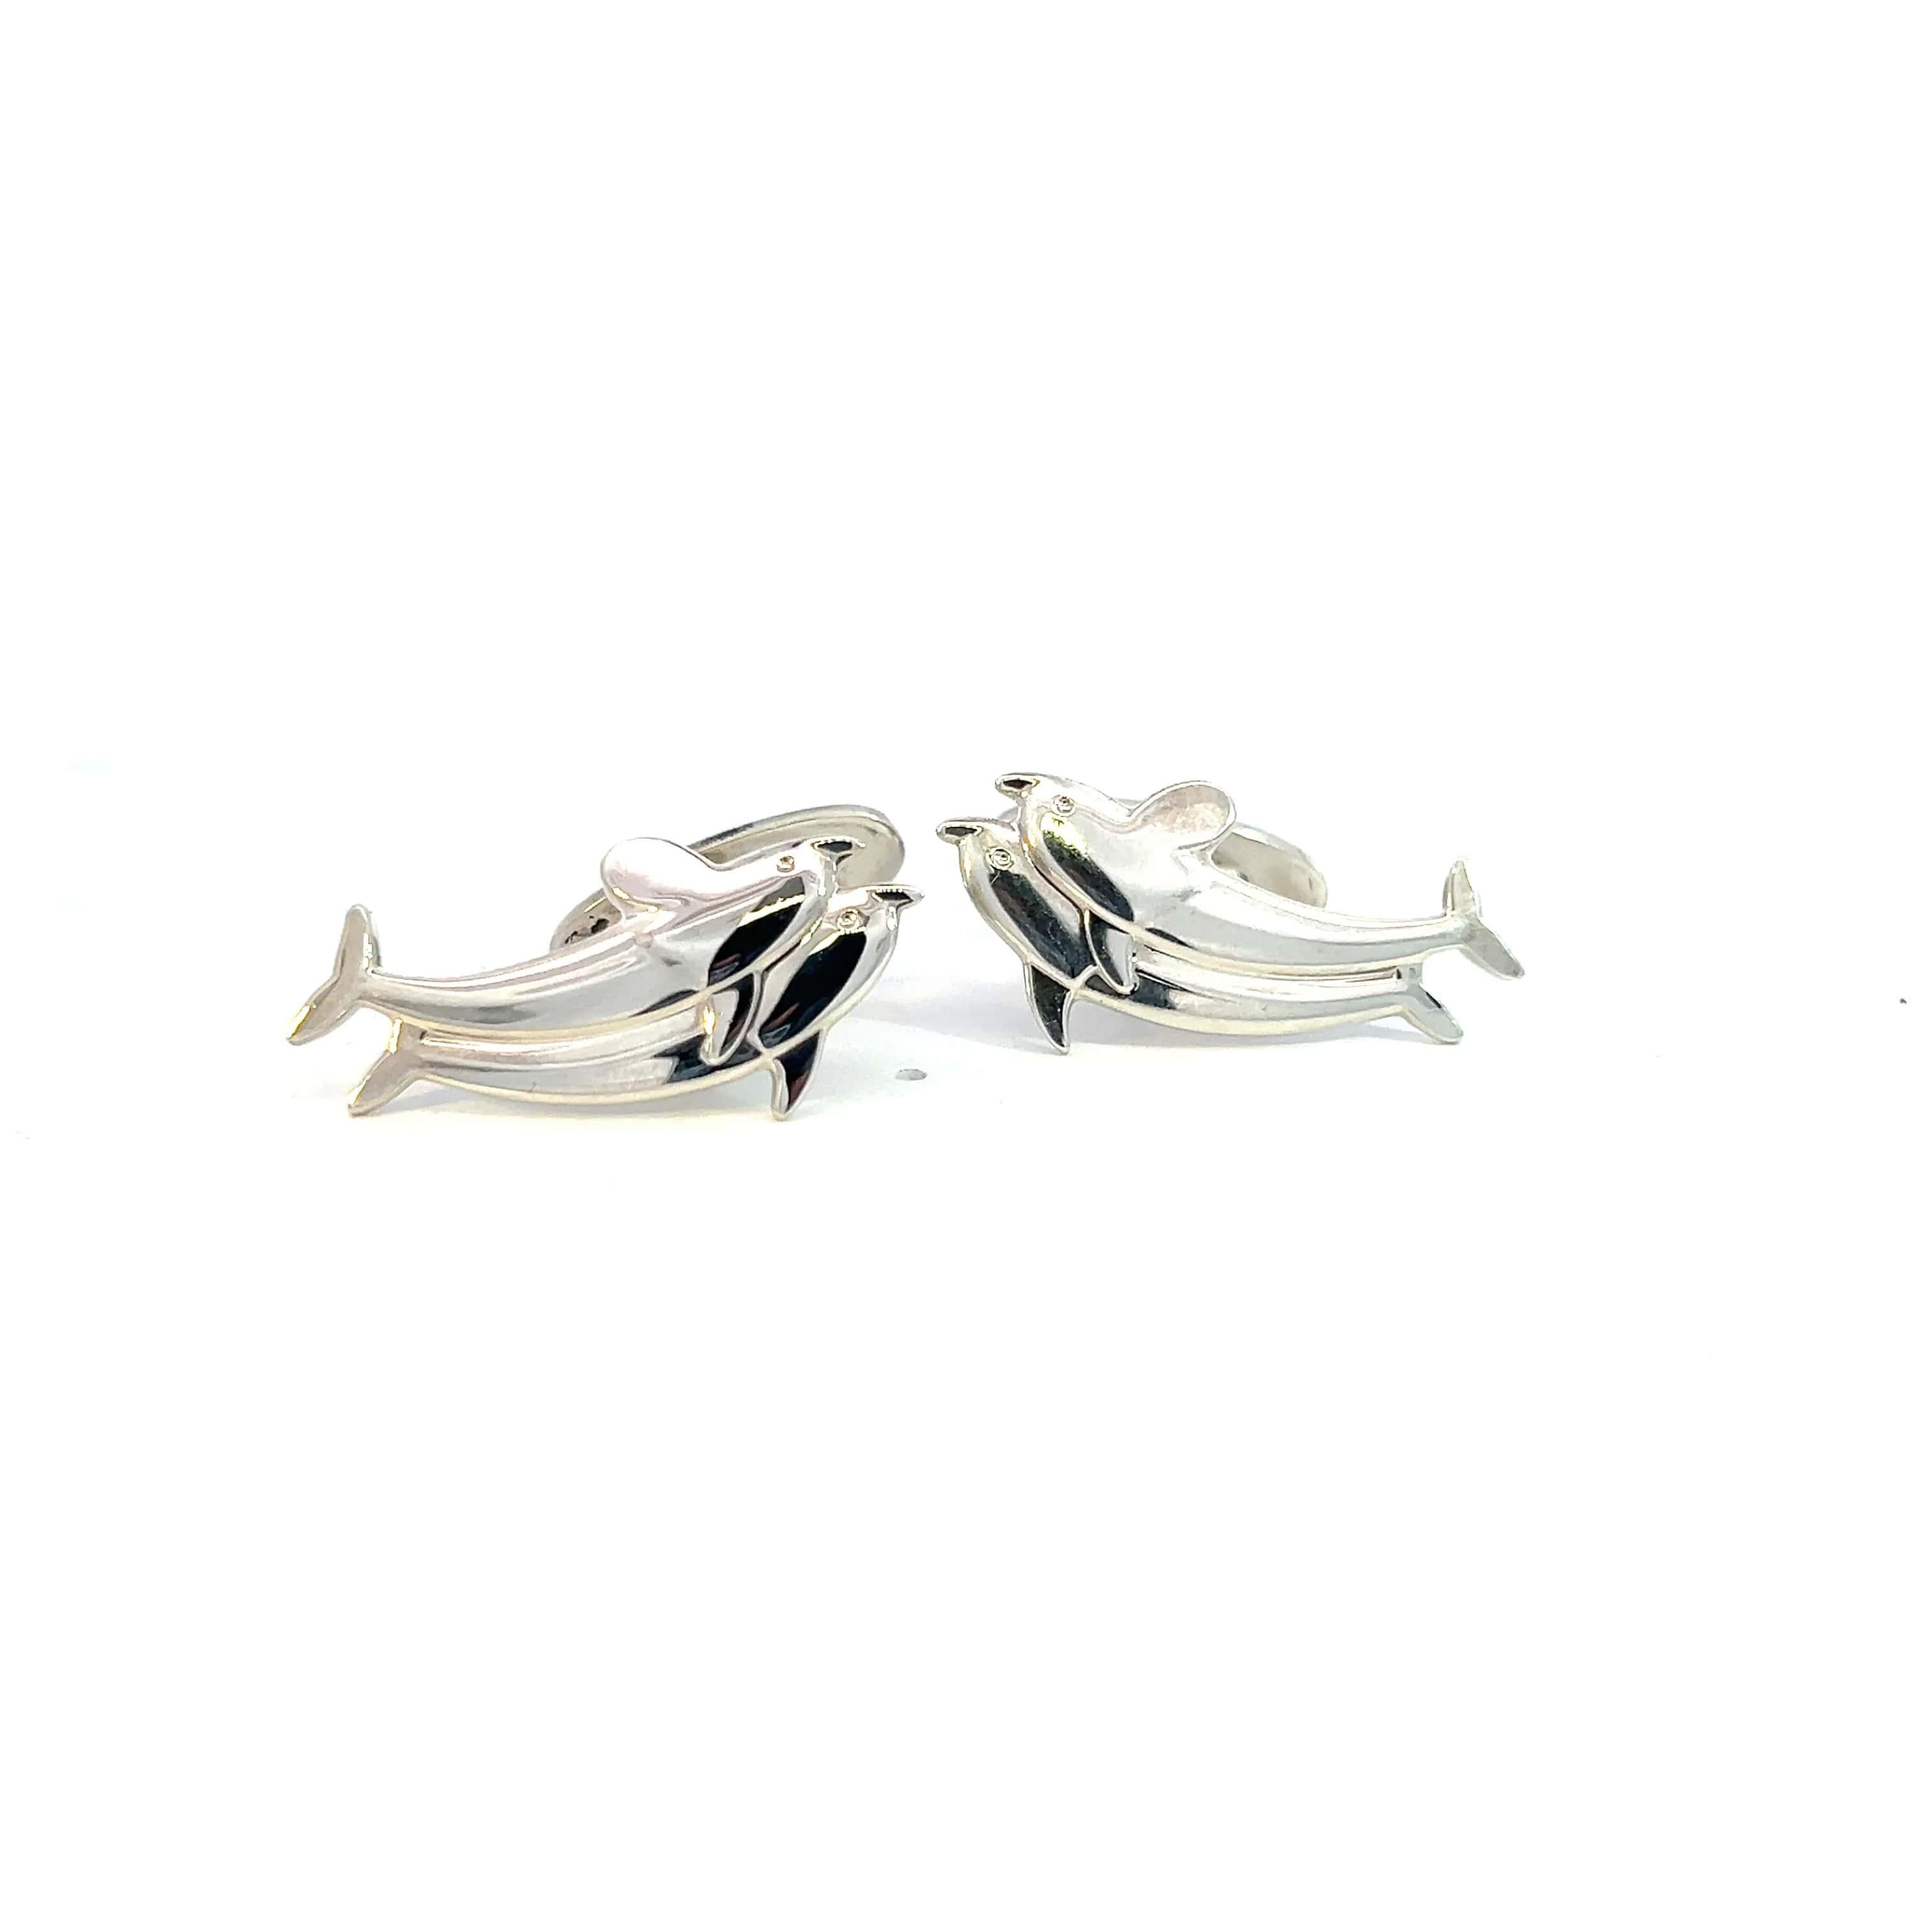 Georg Jensen Estate Dolphin Cufflinks Sterling Silver GJ21

These elegant Authentic Georg Jensen Men's Cufflinks are made of sterling silver and weight 11 grams.

TRUSTED SELLER SINCE 2002

PLEASE SEE OUR HUNDREDS OF POSITIVE FEEDBACKS FROM OUR